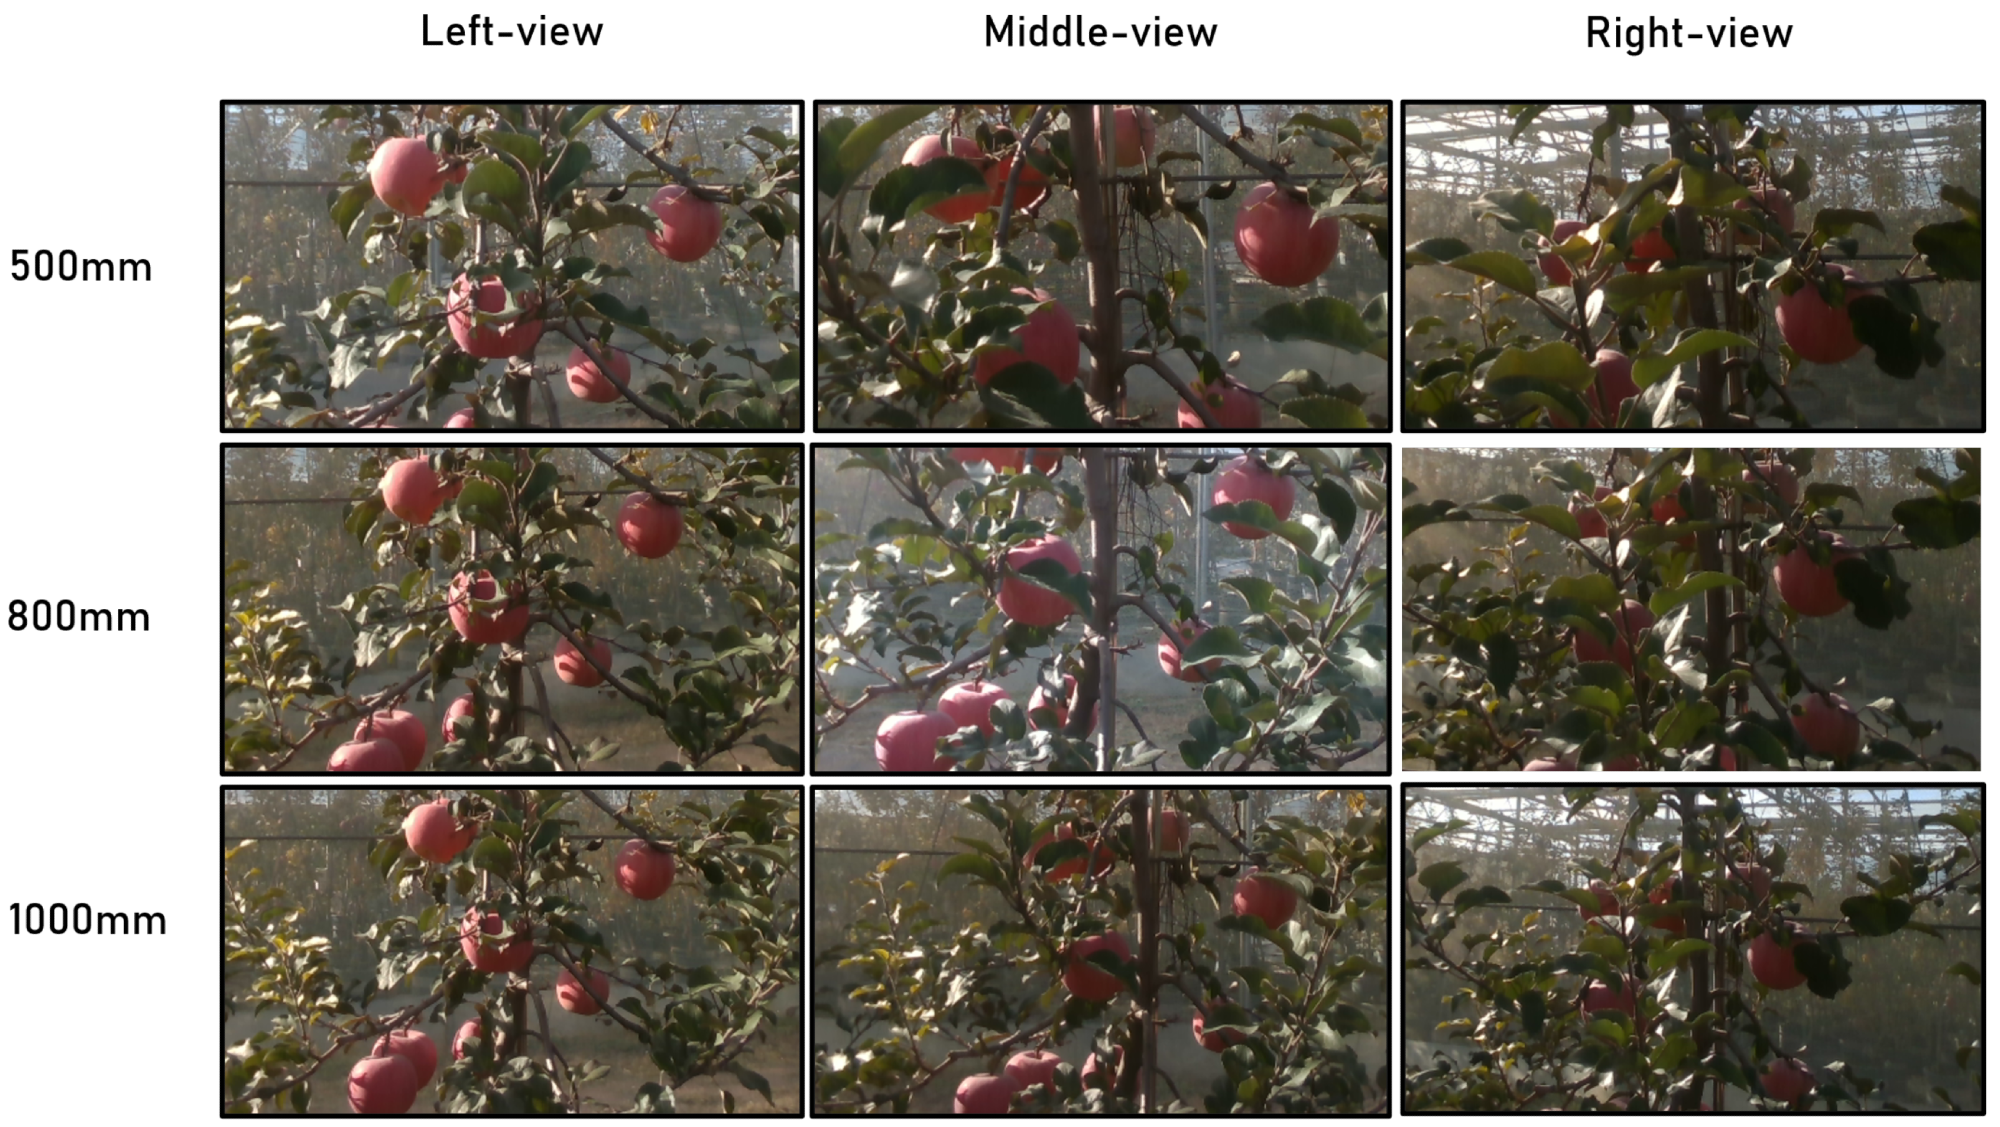 The fruits of the comparison tests at three different distances and views.